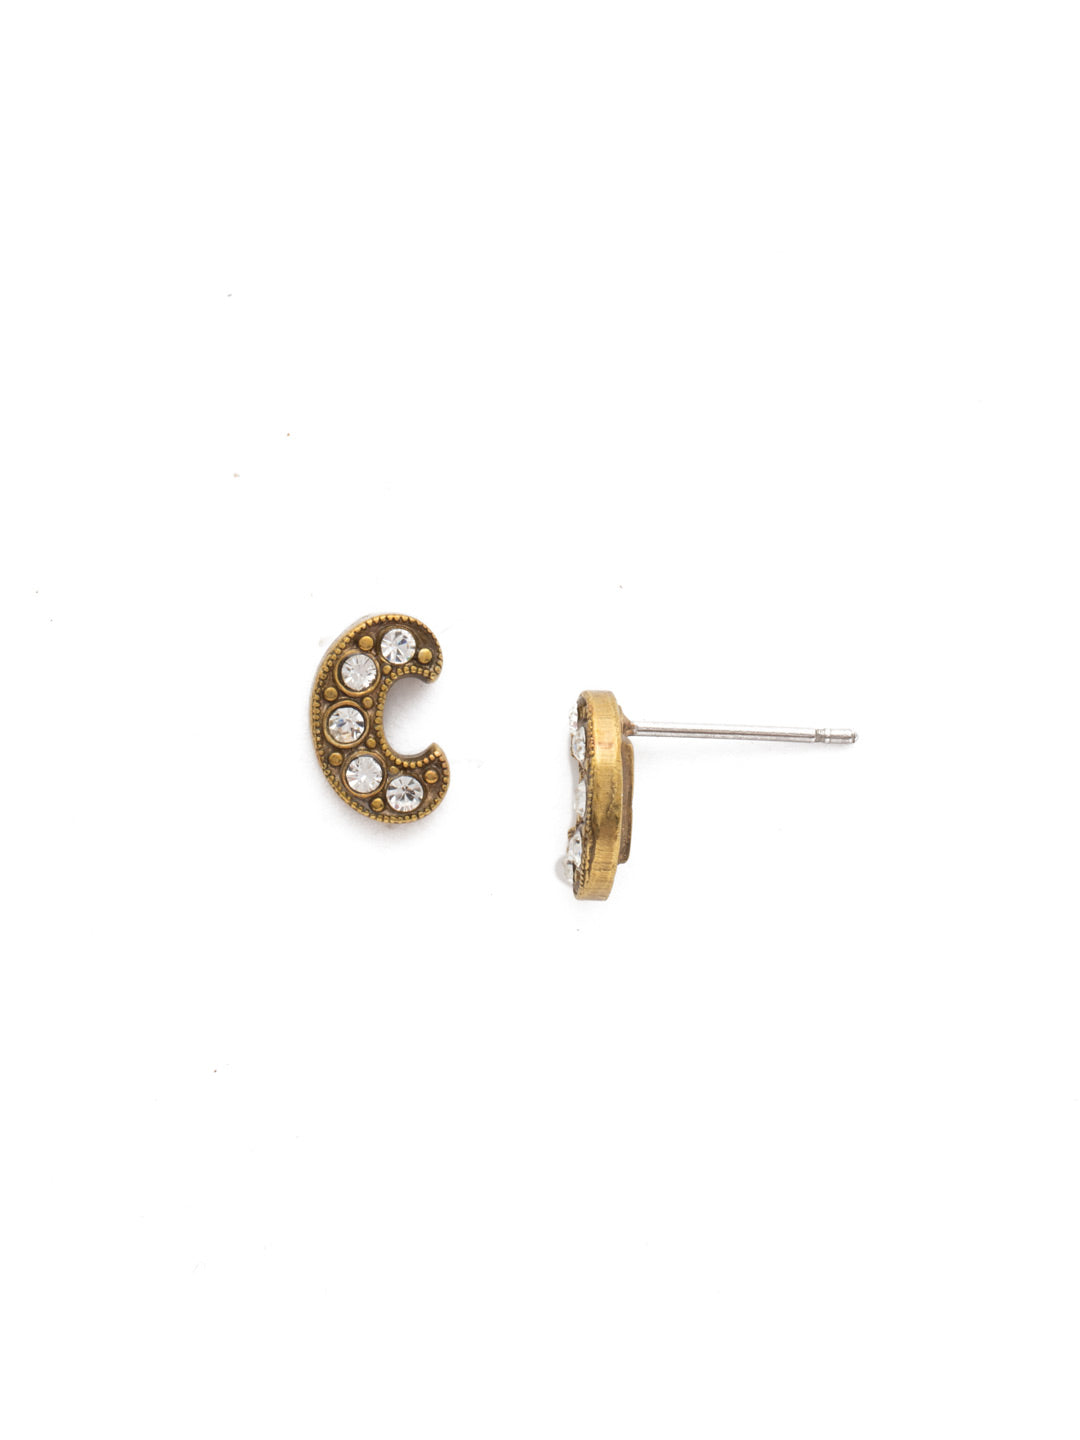 Cici Stud Earrings - EEJ8AGCRY - A classic Sorrelli style to make a statement or wear everyday. From Sorrelli's Crystal collection in our Antique Gold-tone finish.